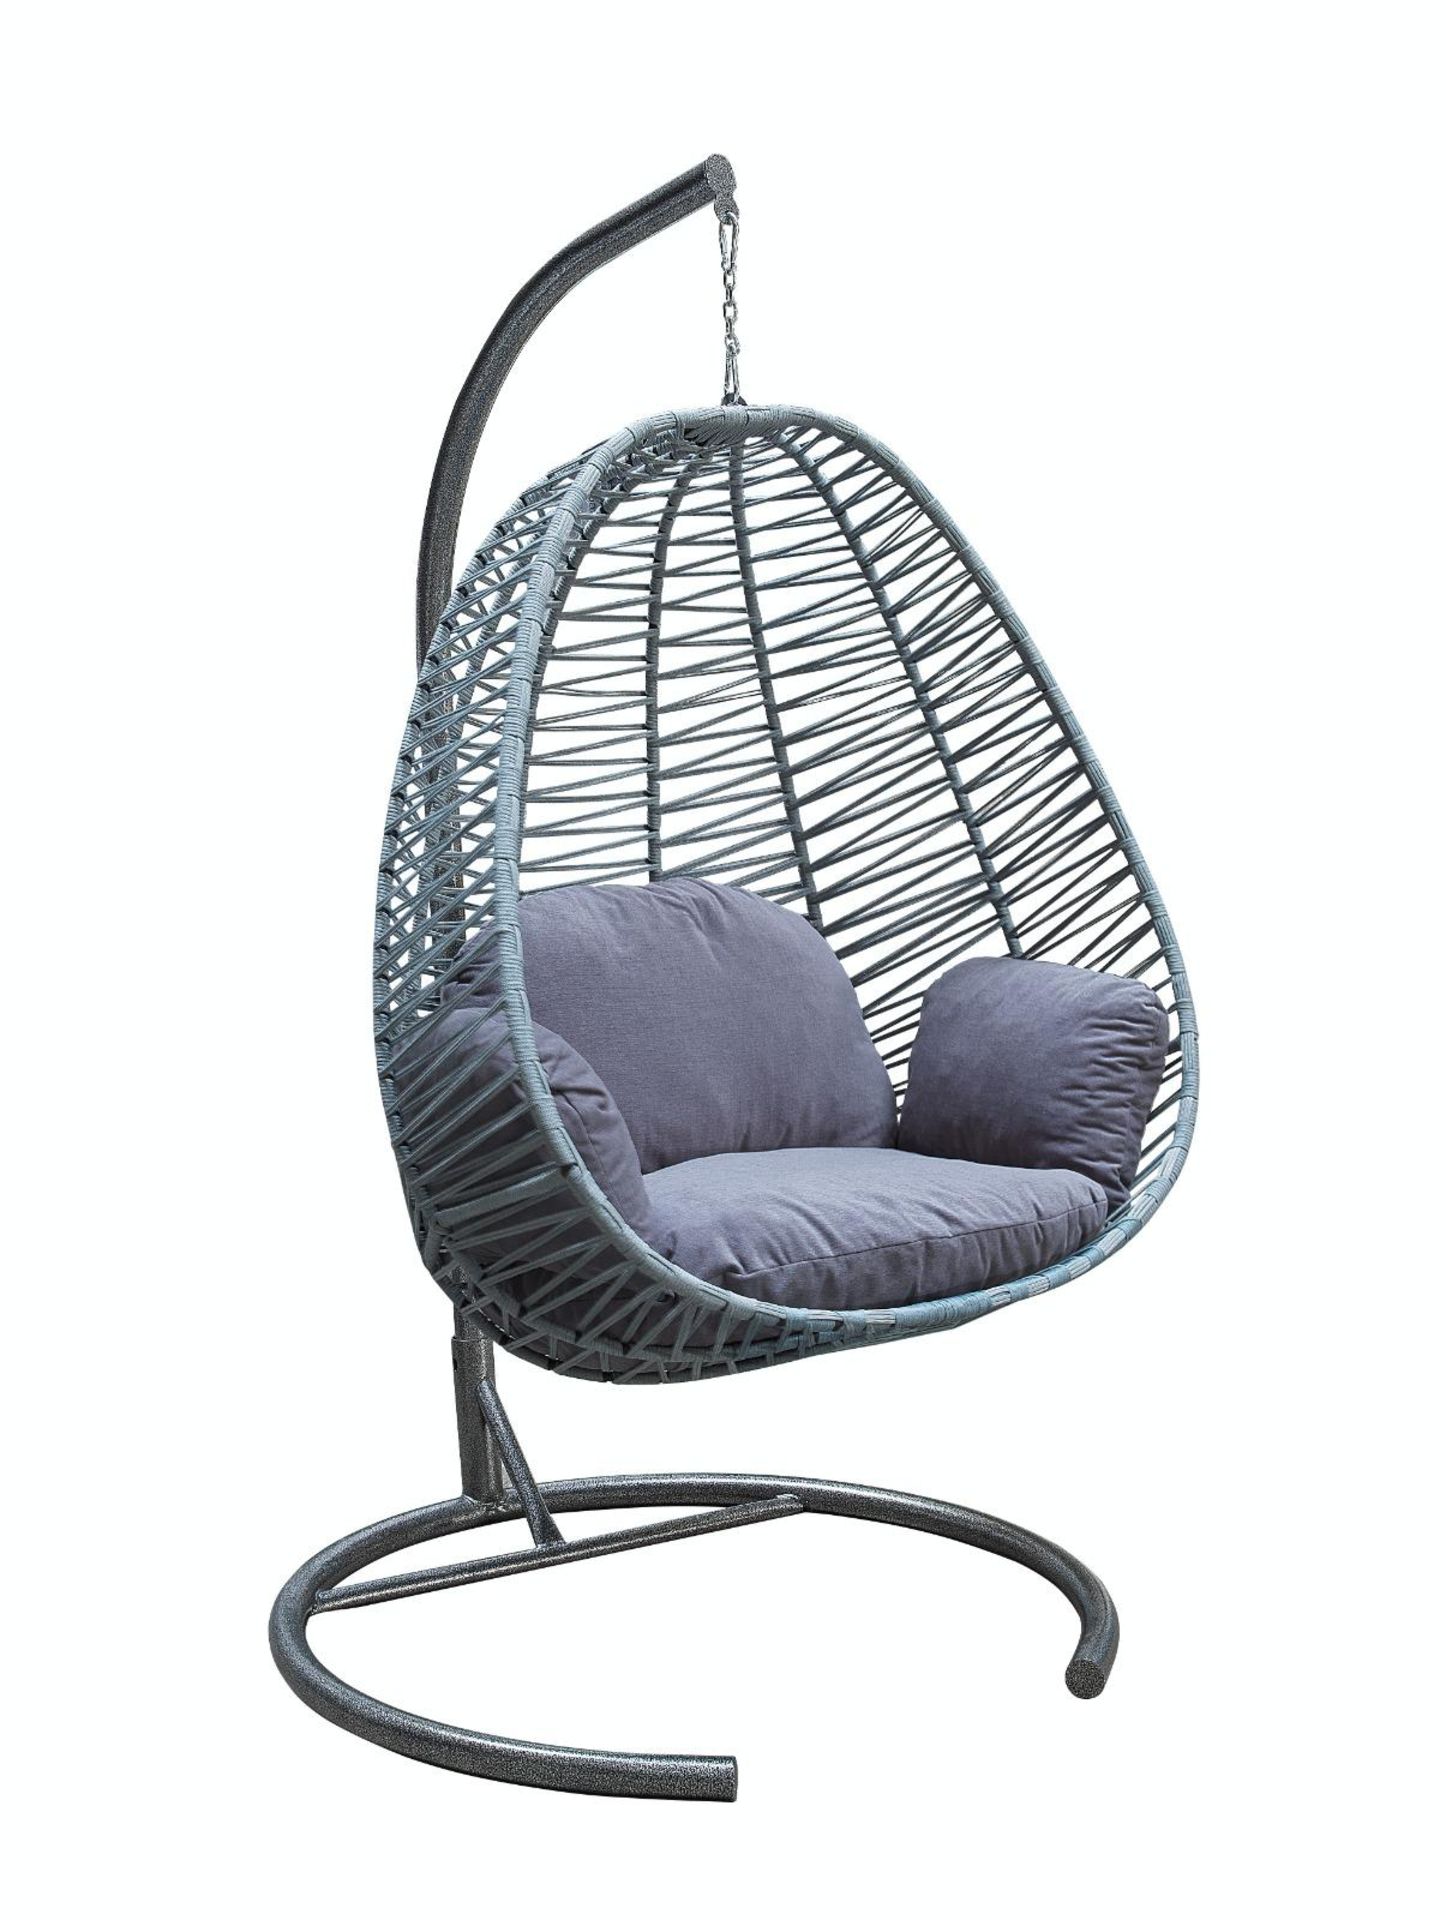 New Dark Grey Luxury Weaved Hanging Egg With Cushion (Similar Chairs £250 to £400)